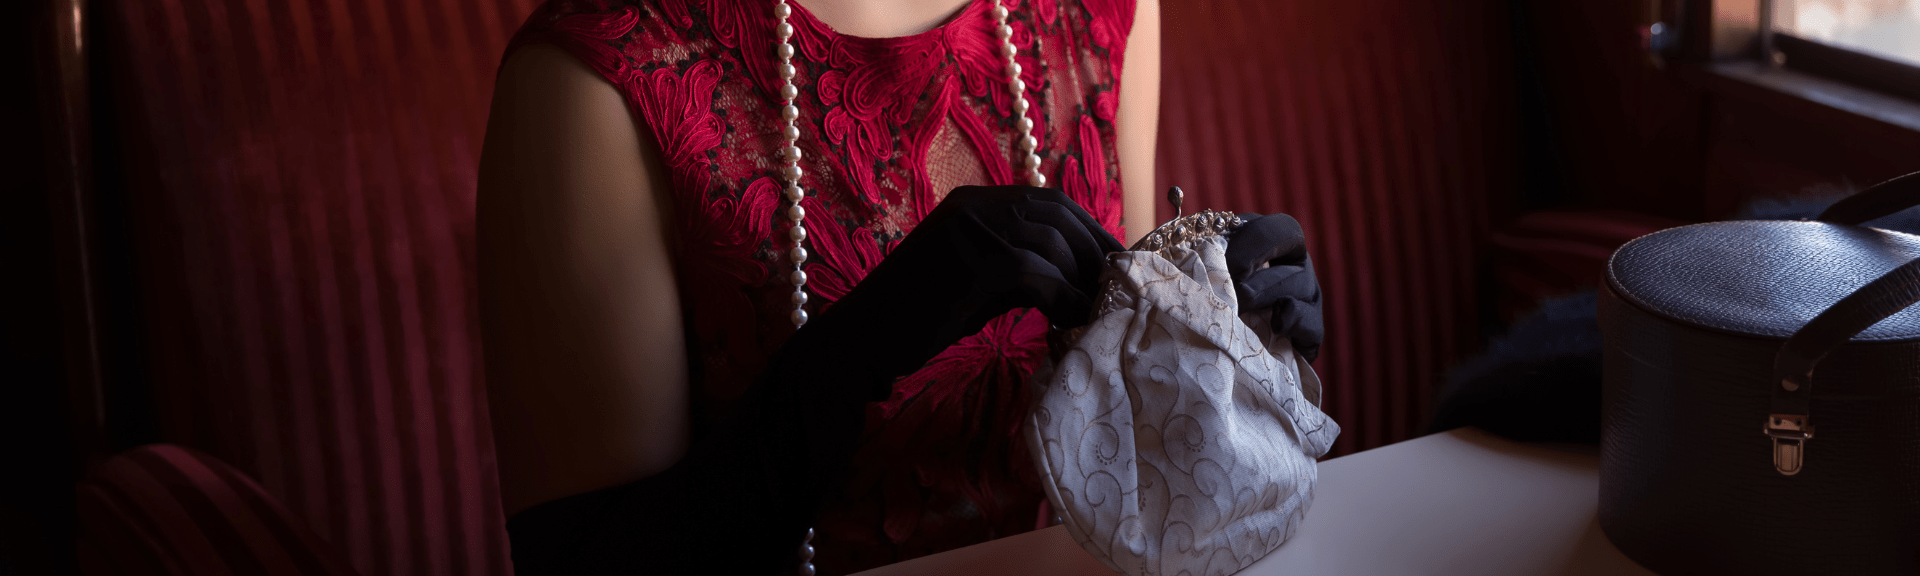 An image of a woman with pearls and a vintage purse.